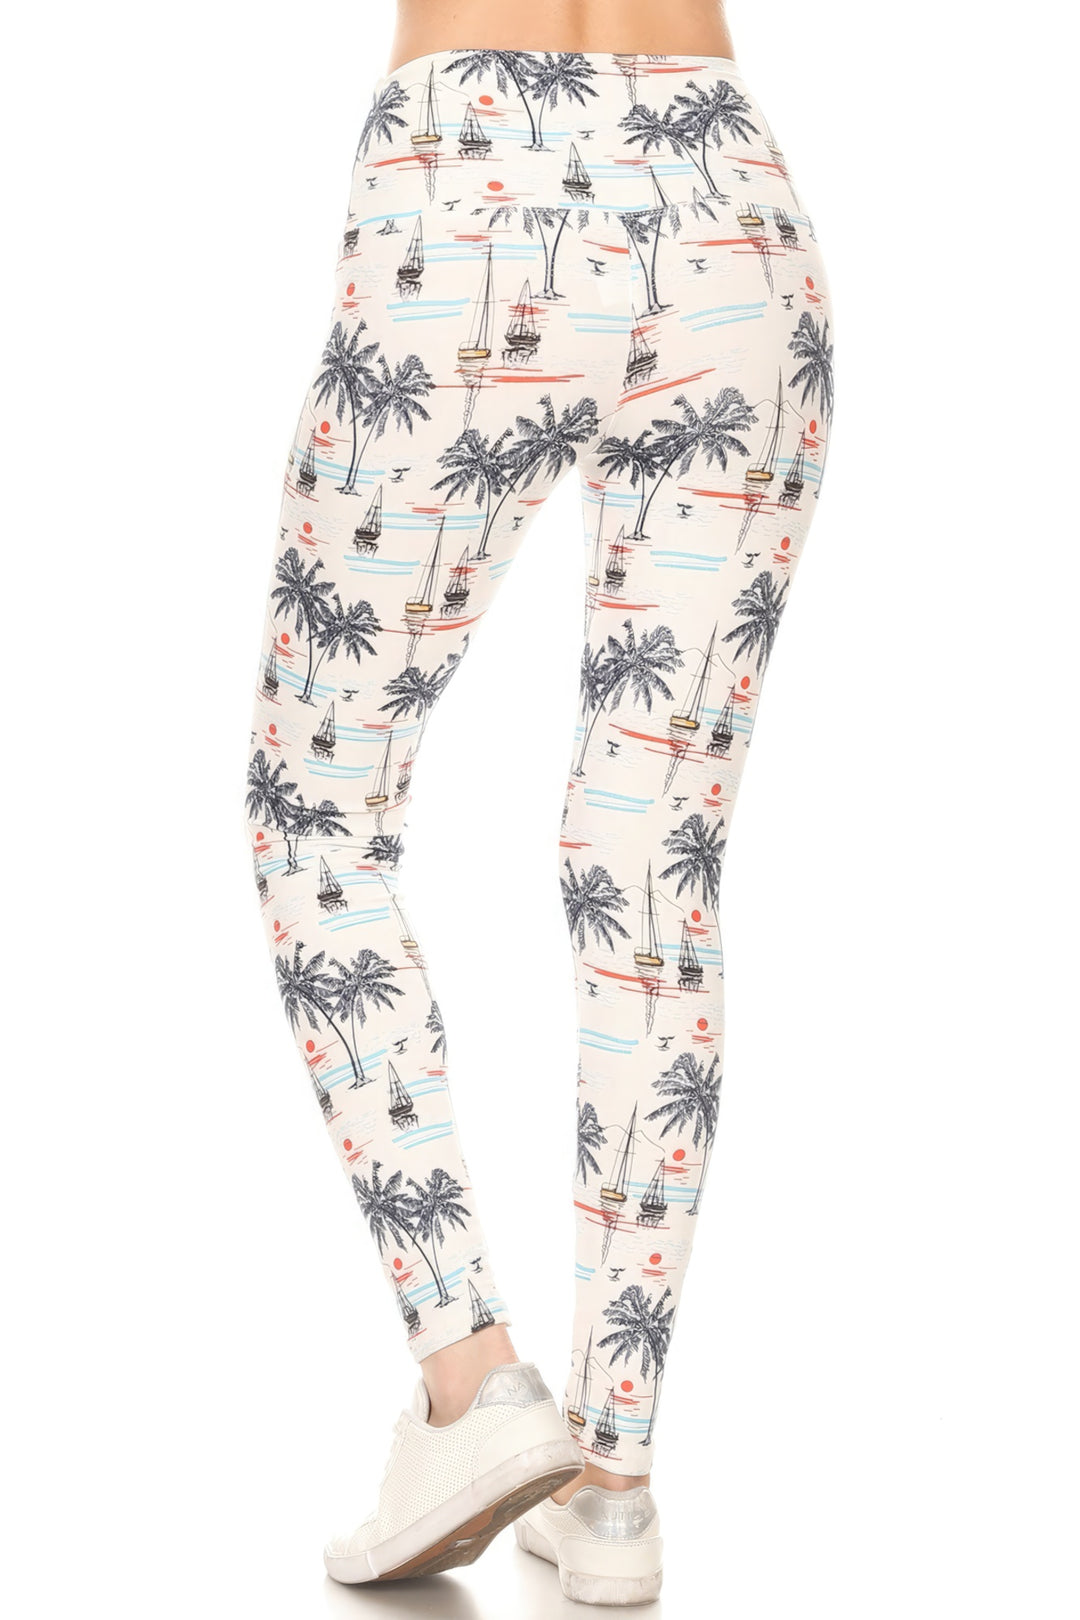 a woman in a white top and palm trees leggings